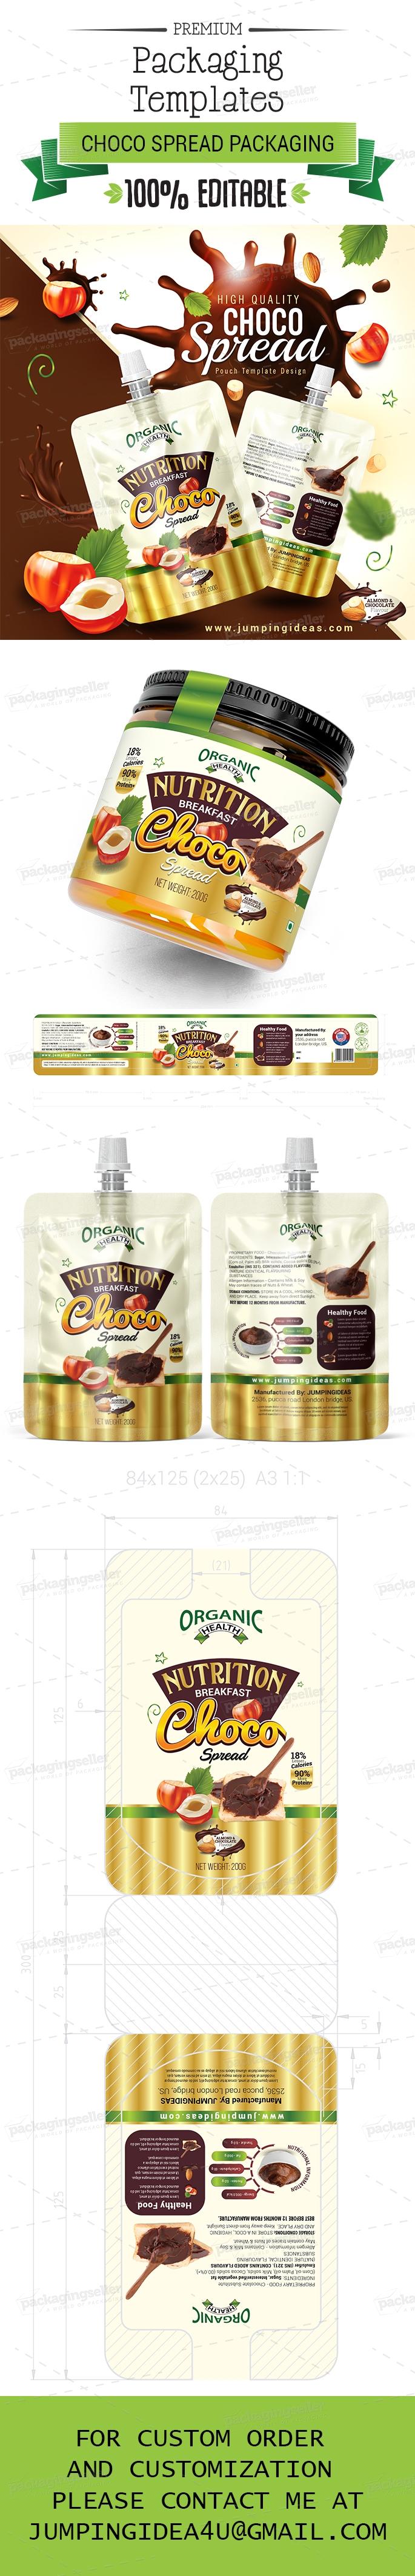 Give your Choco Spread product the premium packaging design it deserves with our comprehensive